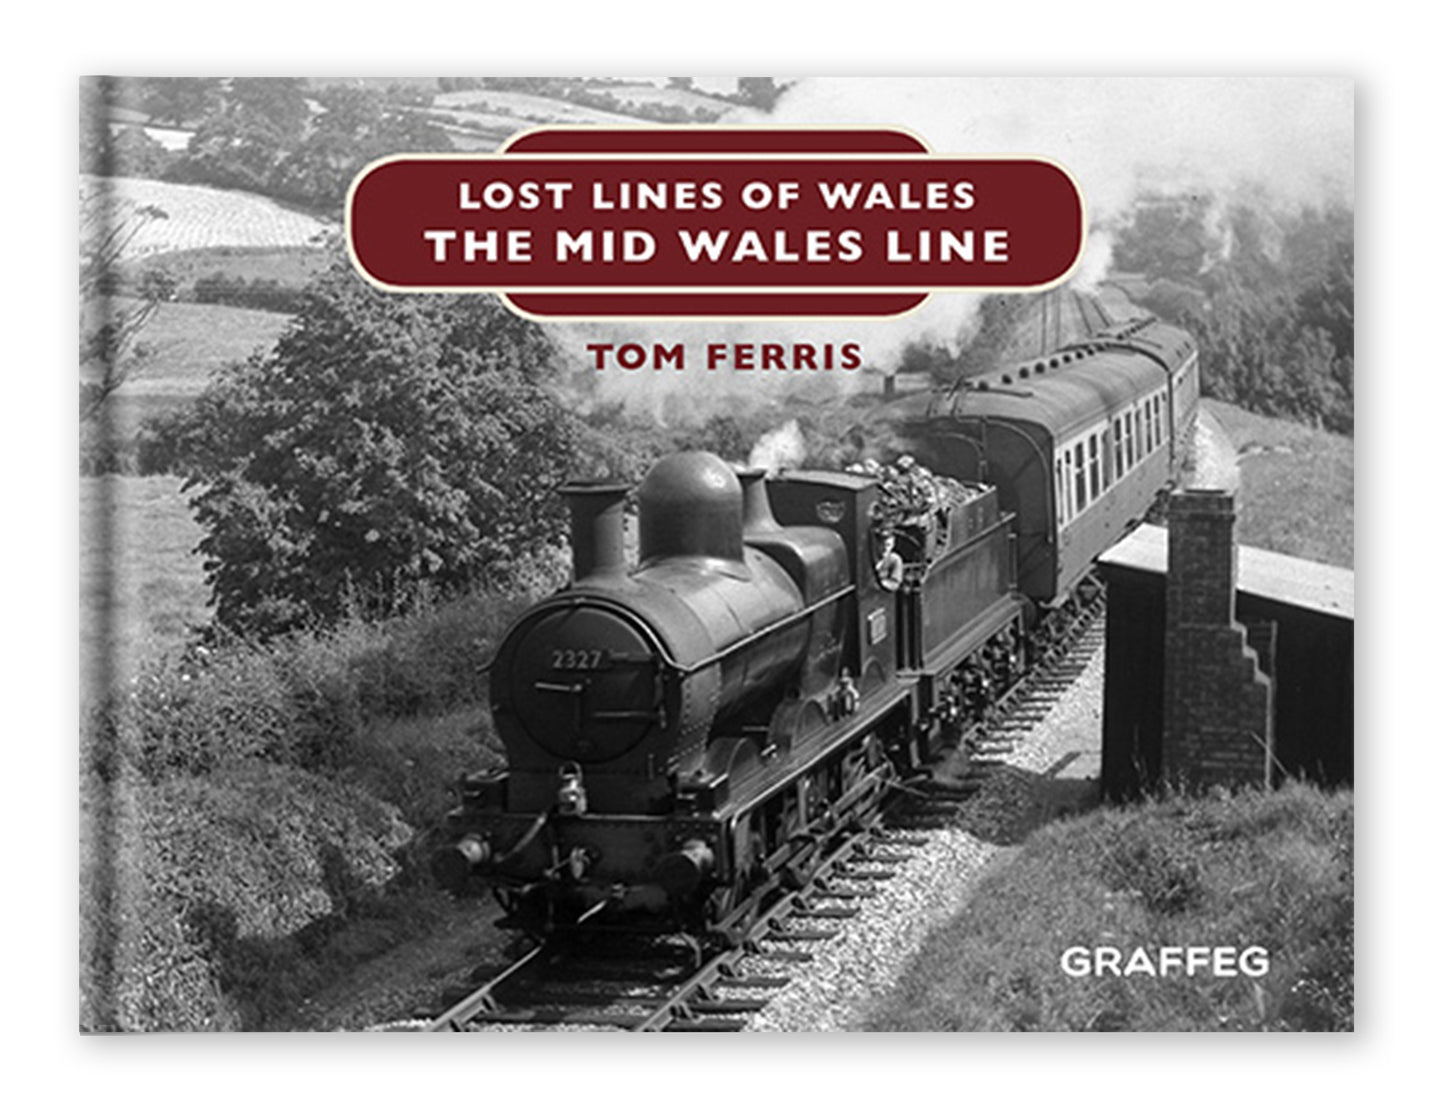 Lost Lines of Wales: The Mid Wales Line by Tom Ferris, published by Graffeg